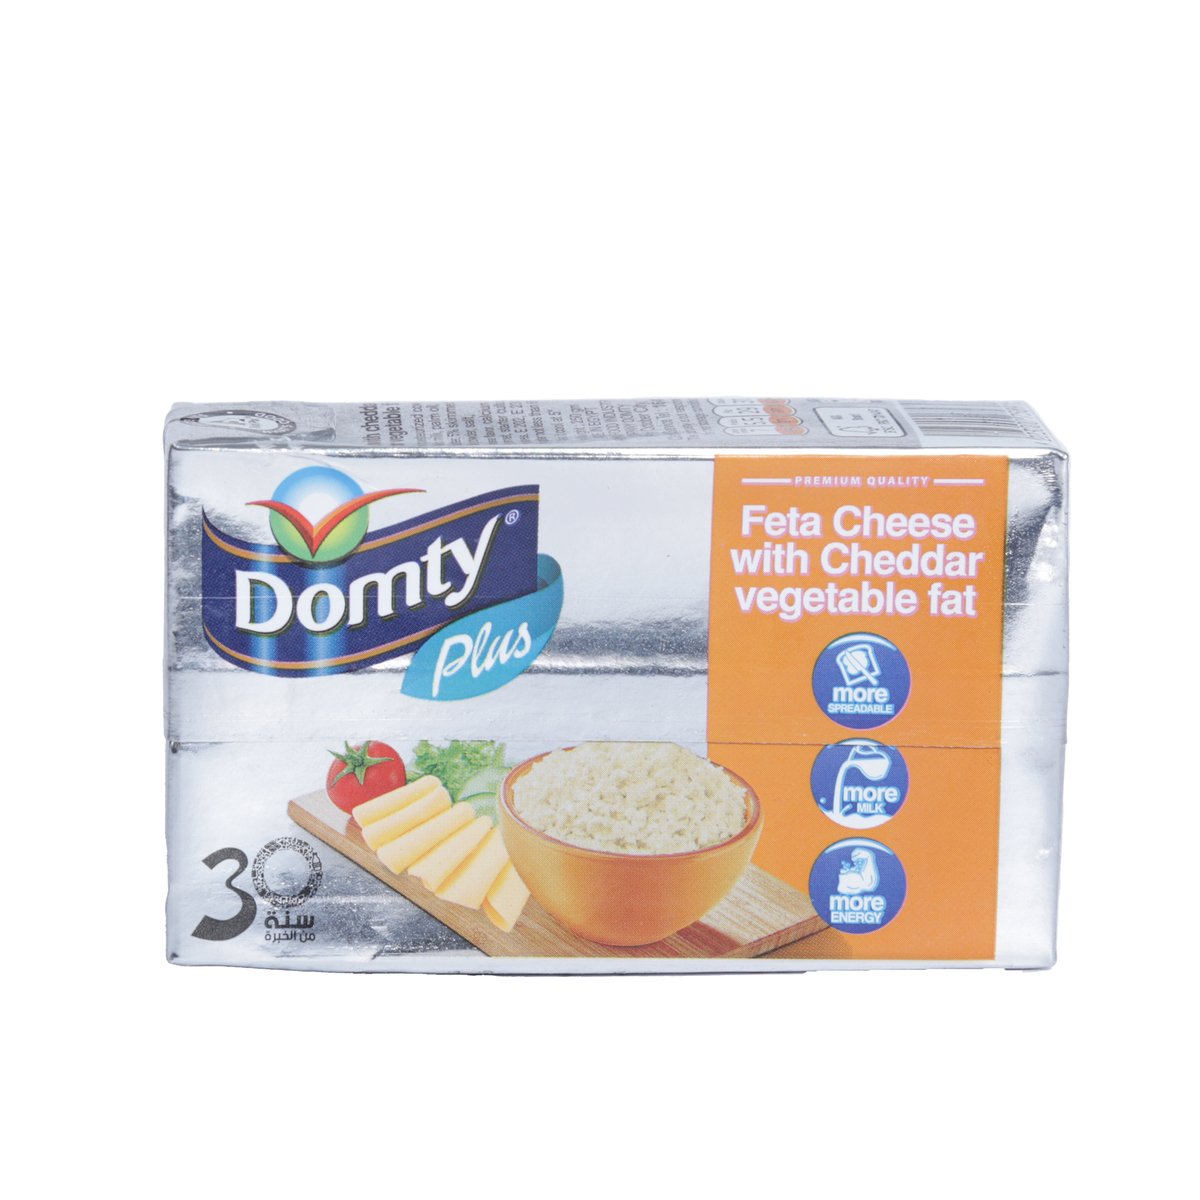 Domty Plus Feta Cheese With Cheddar Vegetable Fat 250 g